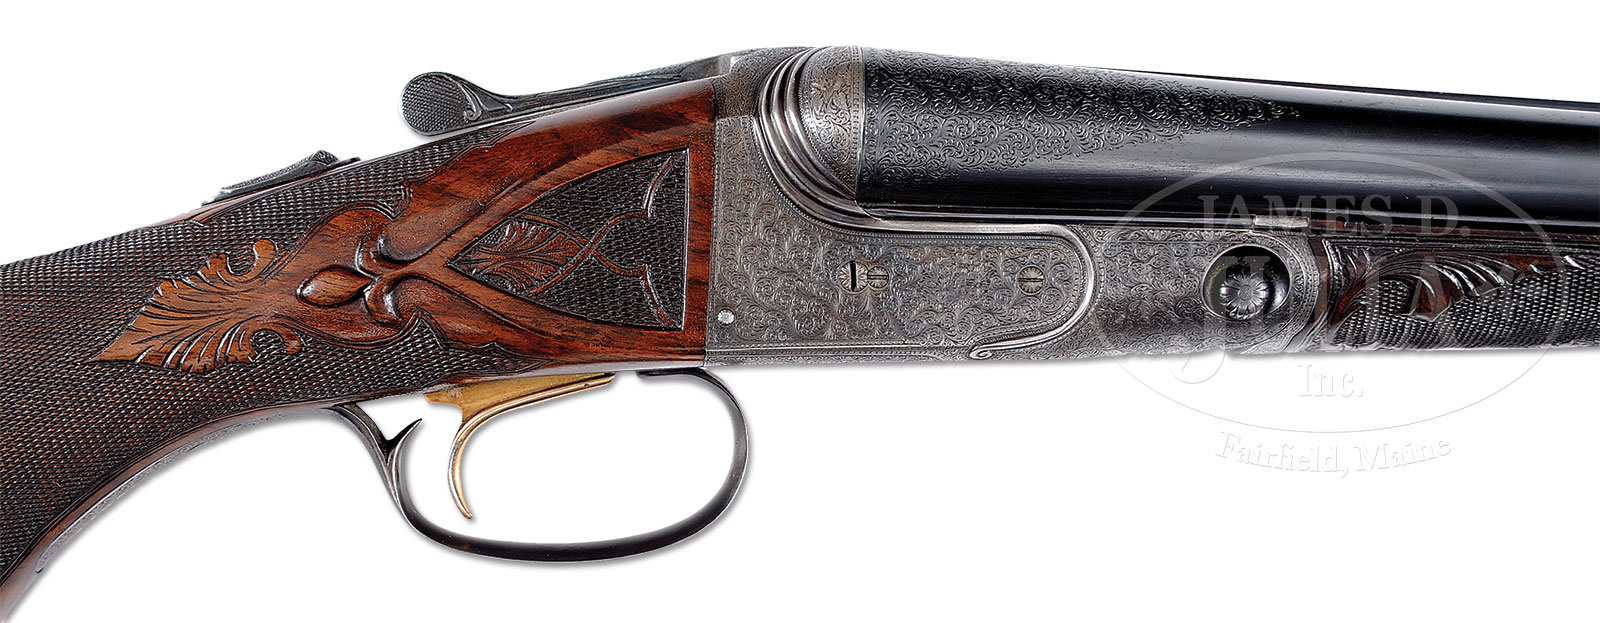 GRAND OLD PARKER “A-1 SPECIAL” SHOTGUN DESCRIBED AND ILLUSTRATED IN “THE PARKER STORY” AND ON THE COVER OF THE JANUARY 1992 “CADA GUN JOURNAL” WITH CASE AND PGCA LETTER.